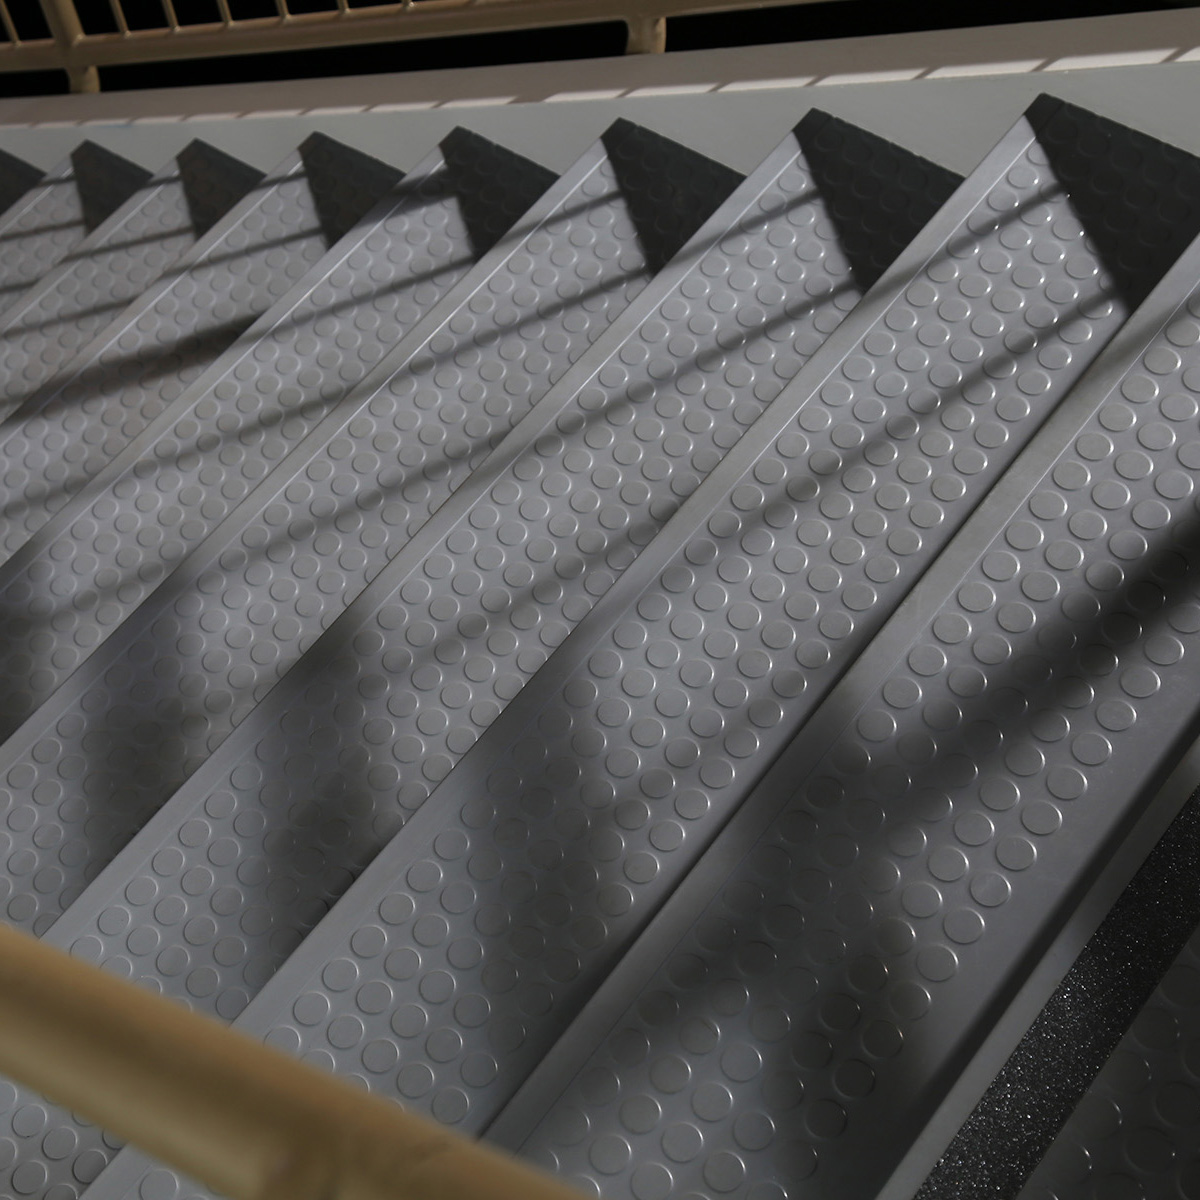 rubber stair treads with DuPont Kevlar